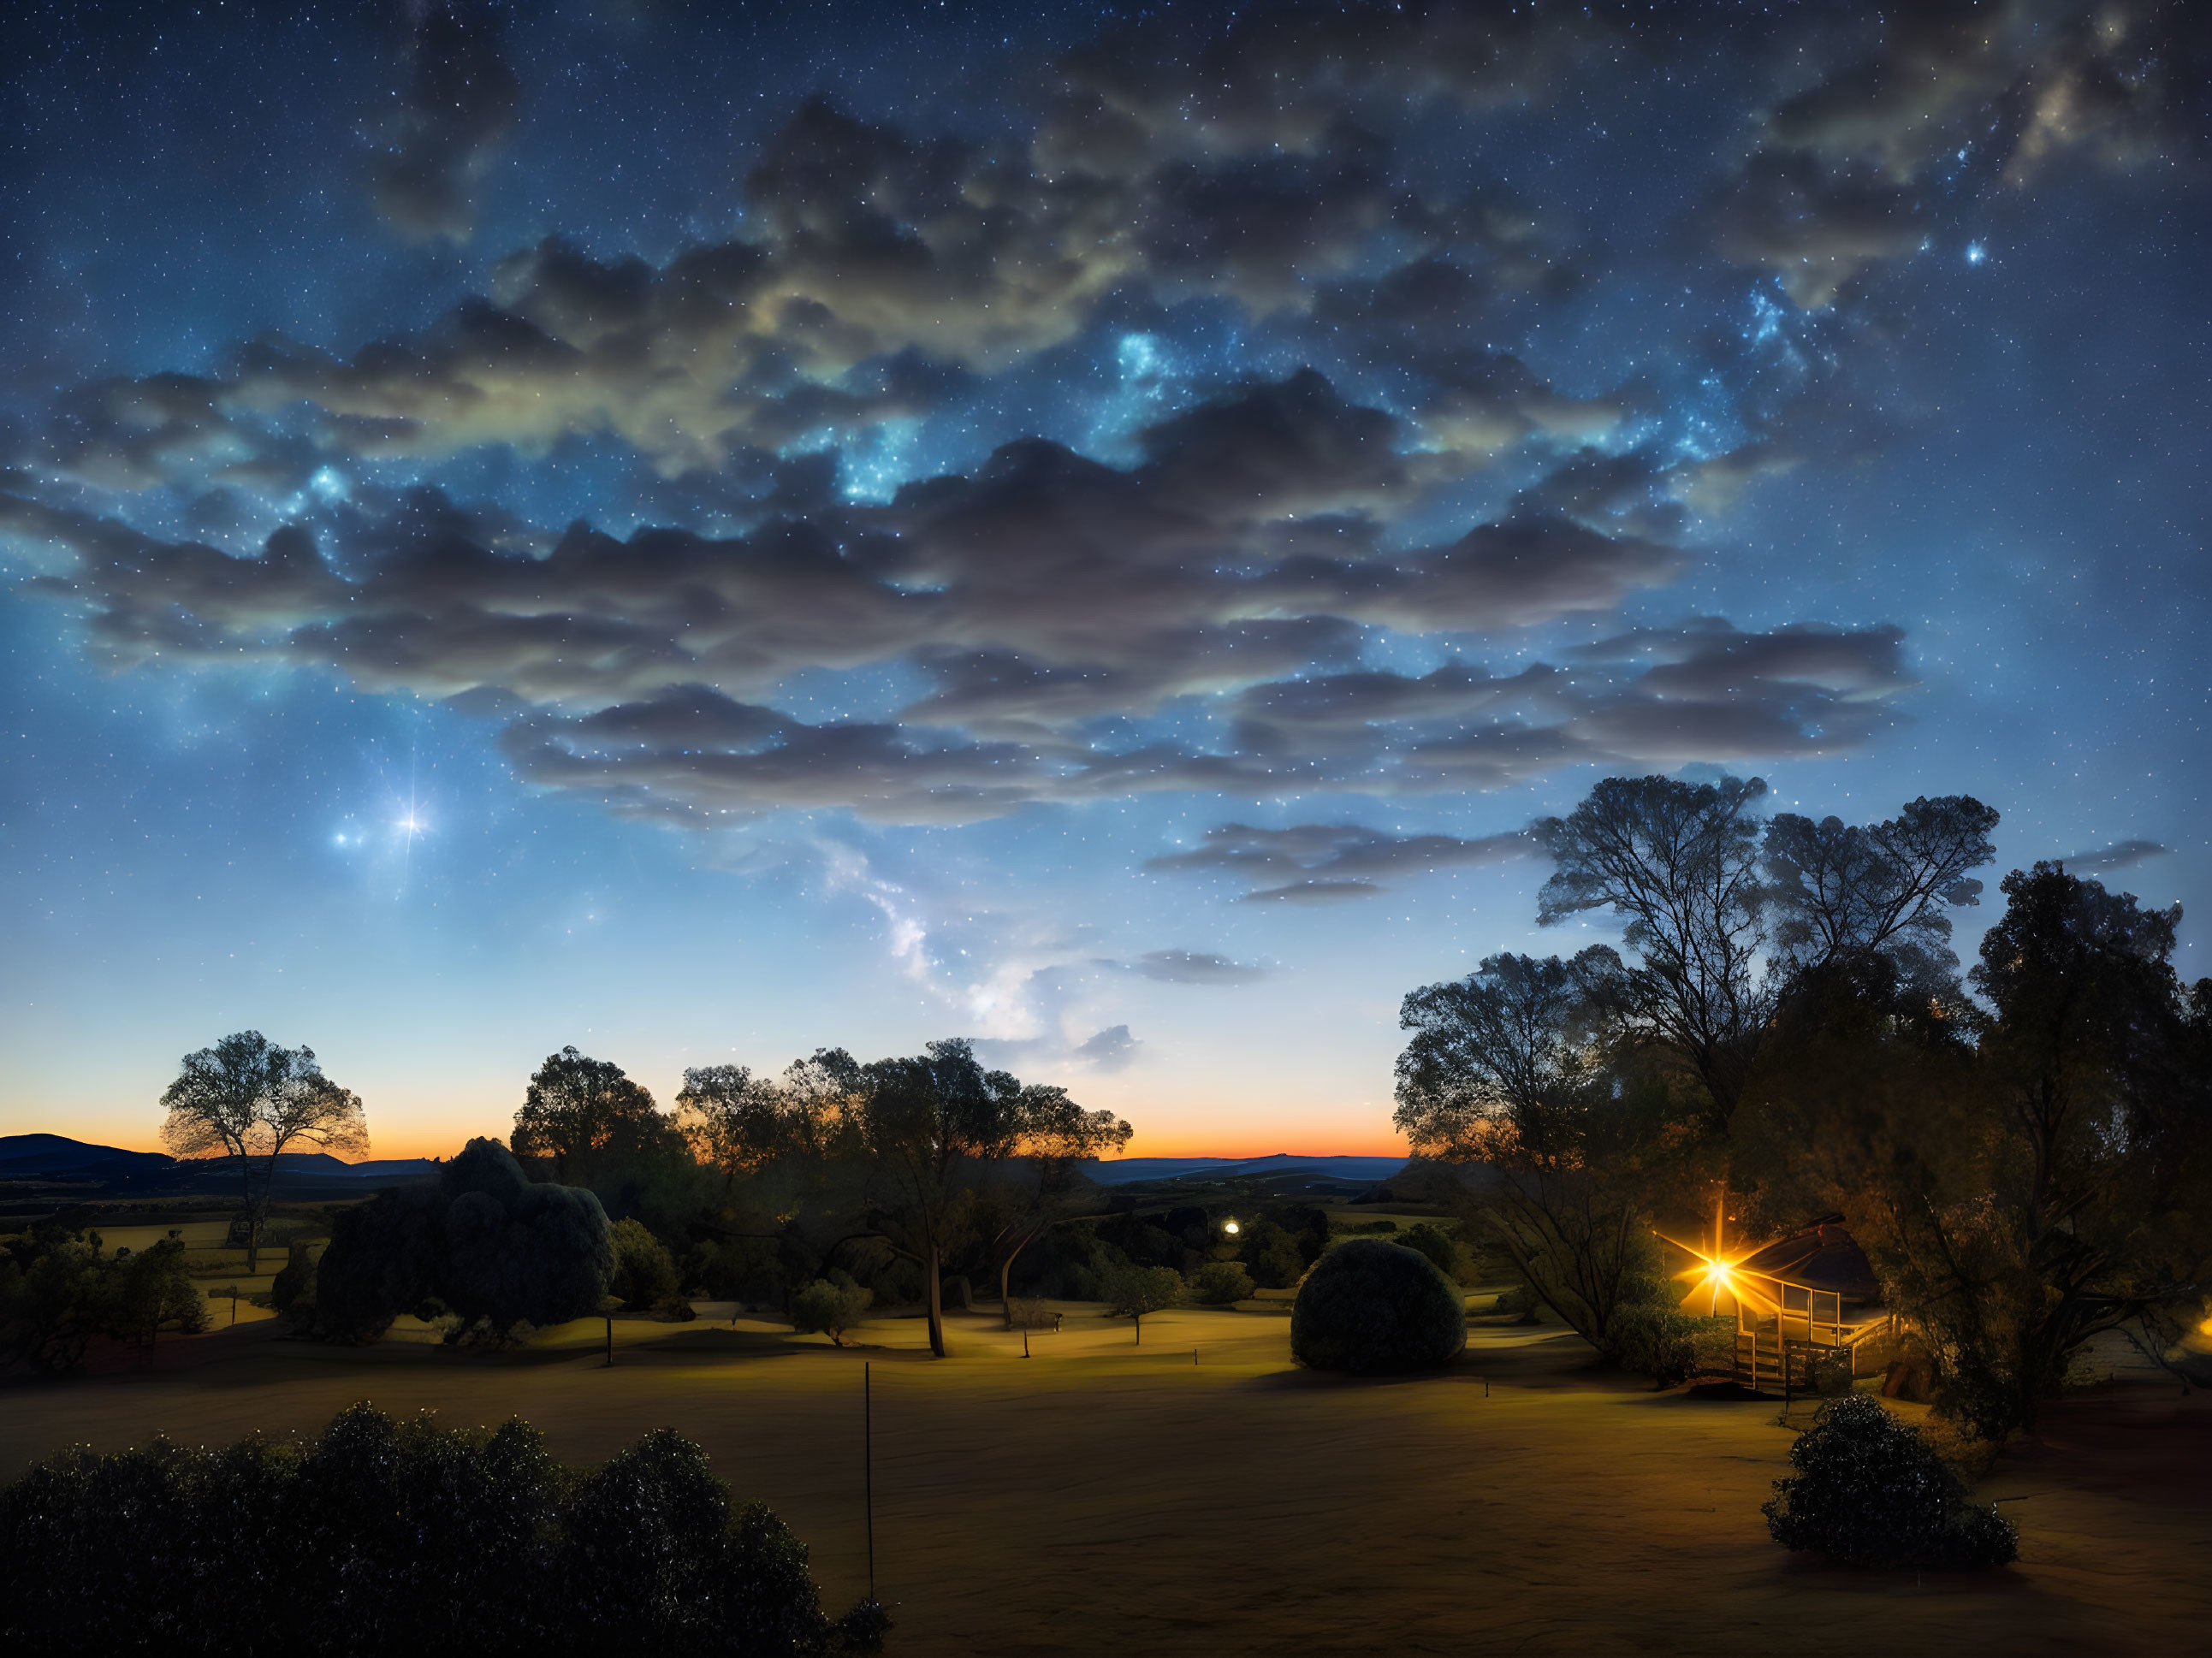 Tranquil twilight scene with starlit sky, radiant star, silhouetted trees, and